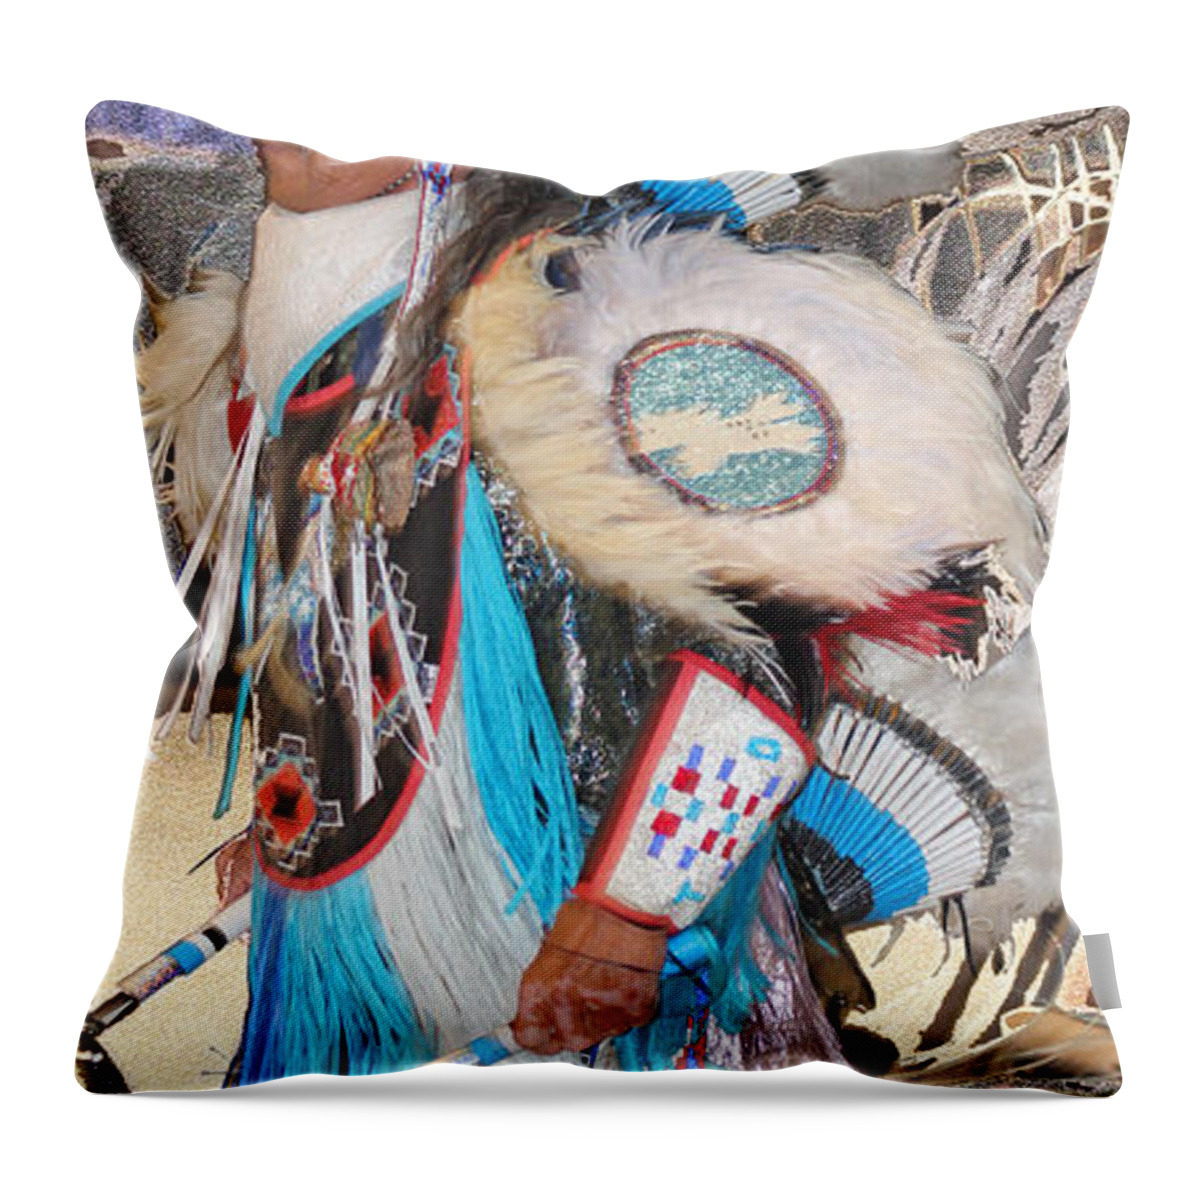 Native Americans Throw Pillow featuring the photograph Pow Wow Dancer by Audrey Robillard